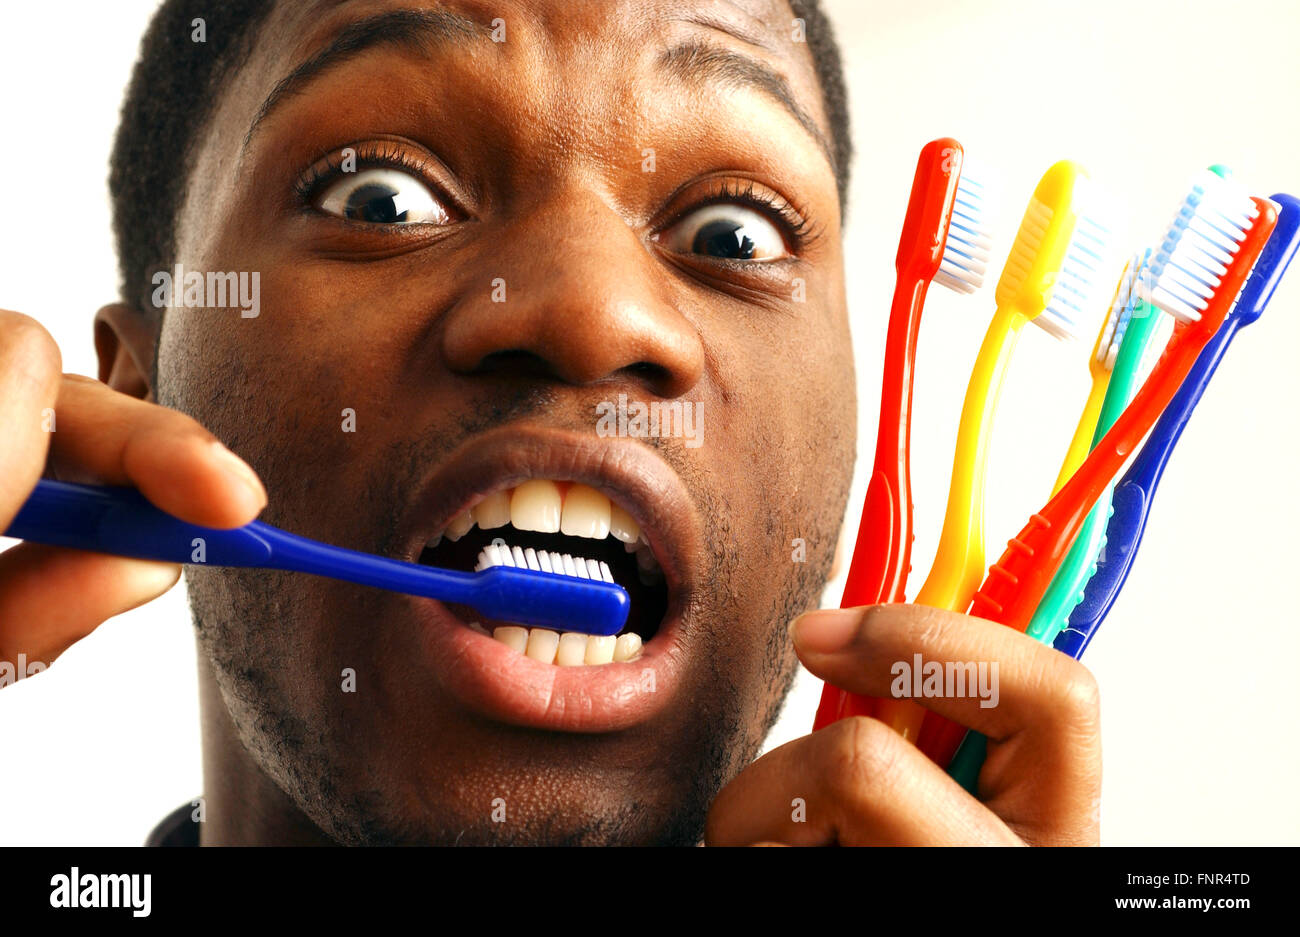 A young man brushes his teeth with one hand, whilst holding a number of toothbrushes in his other hand. Stock Photo